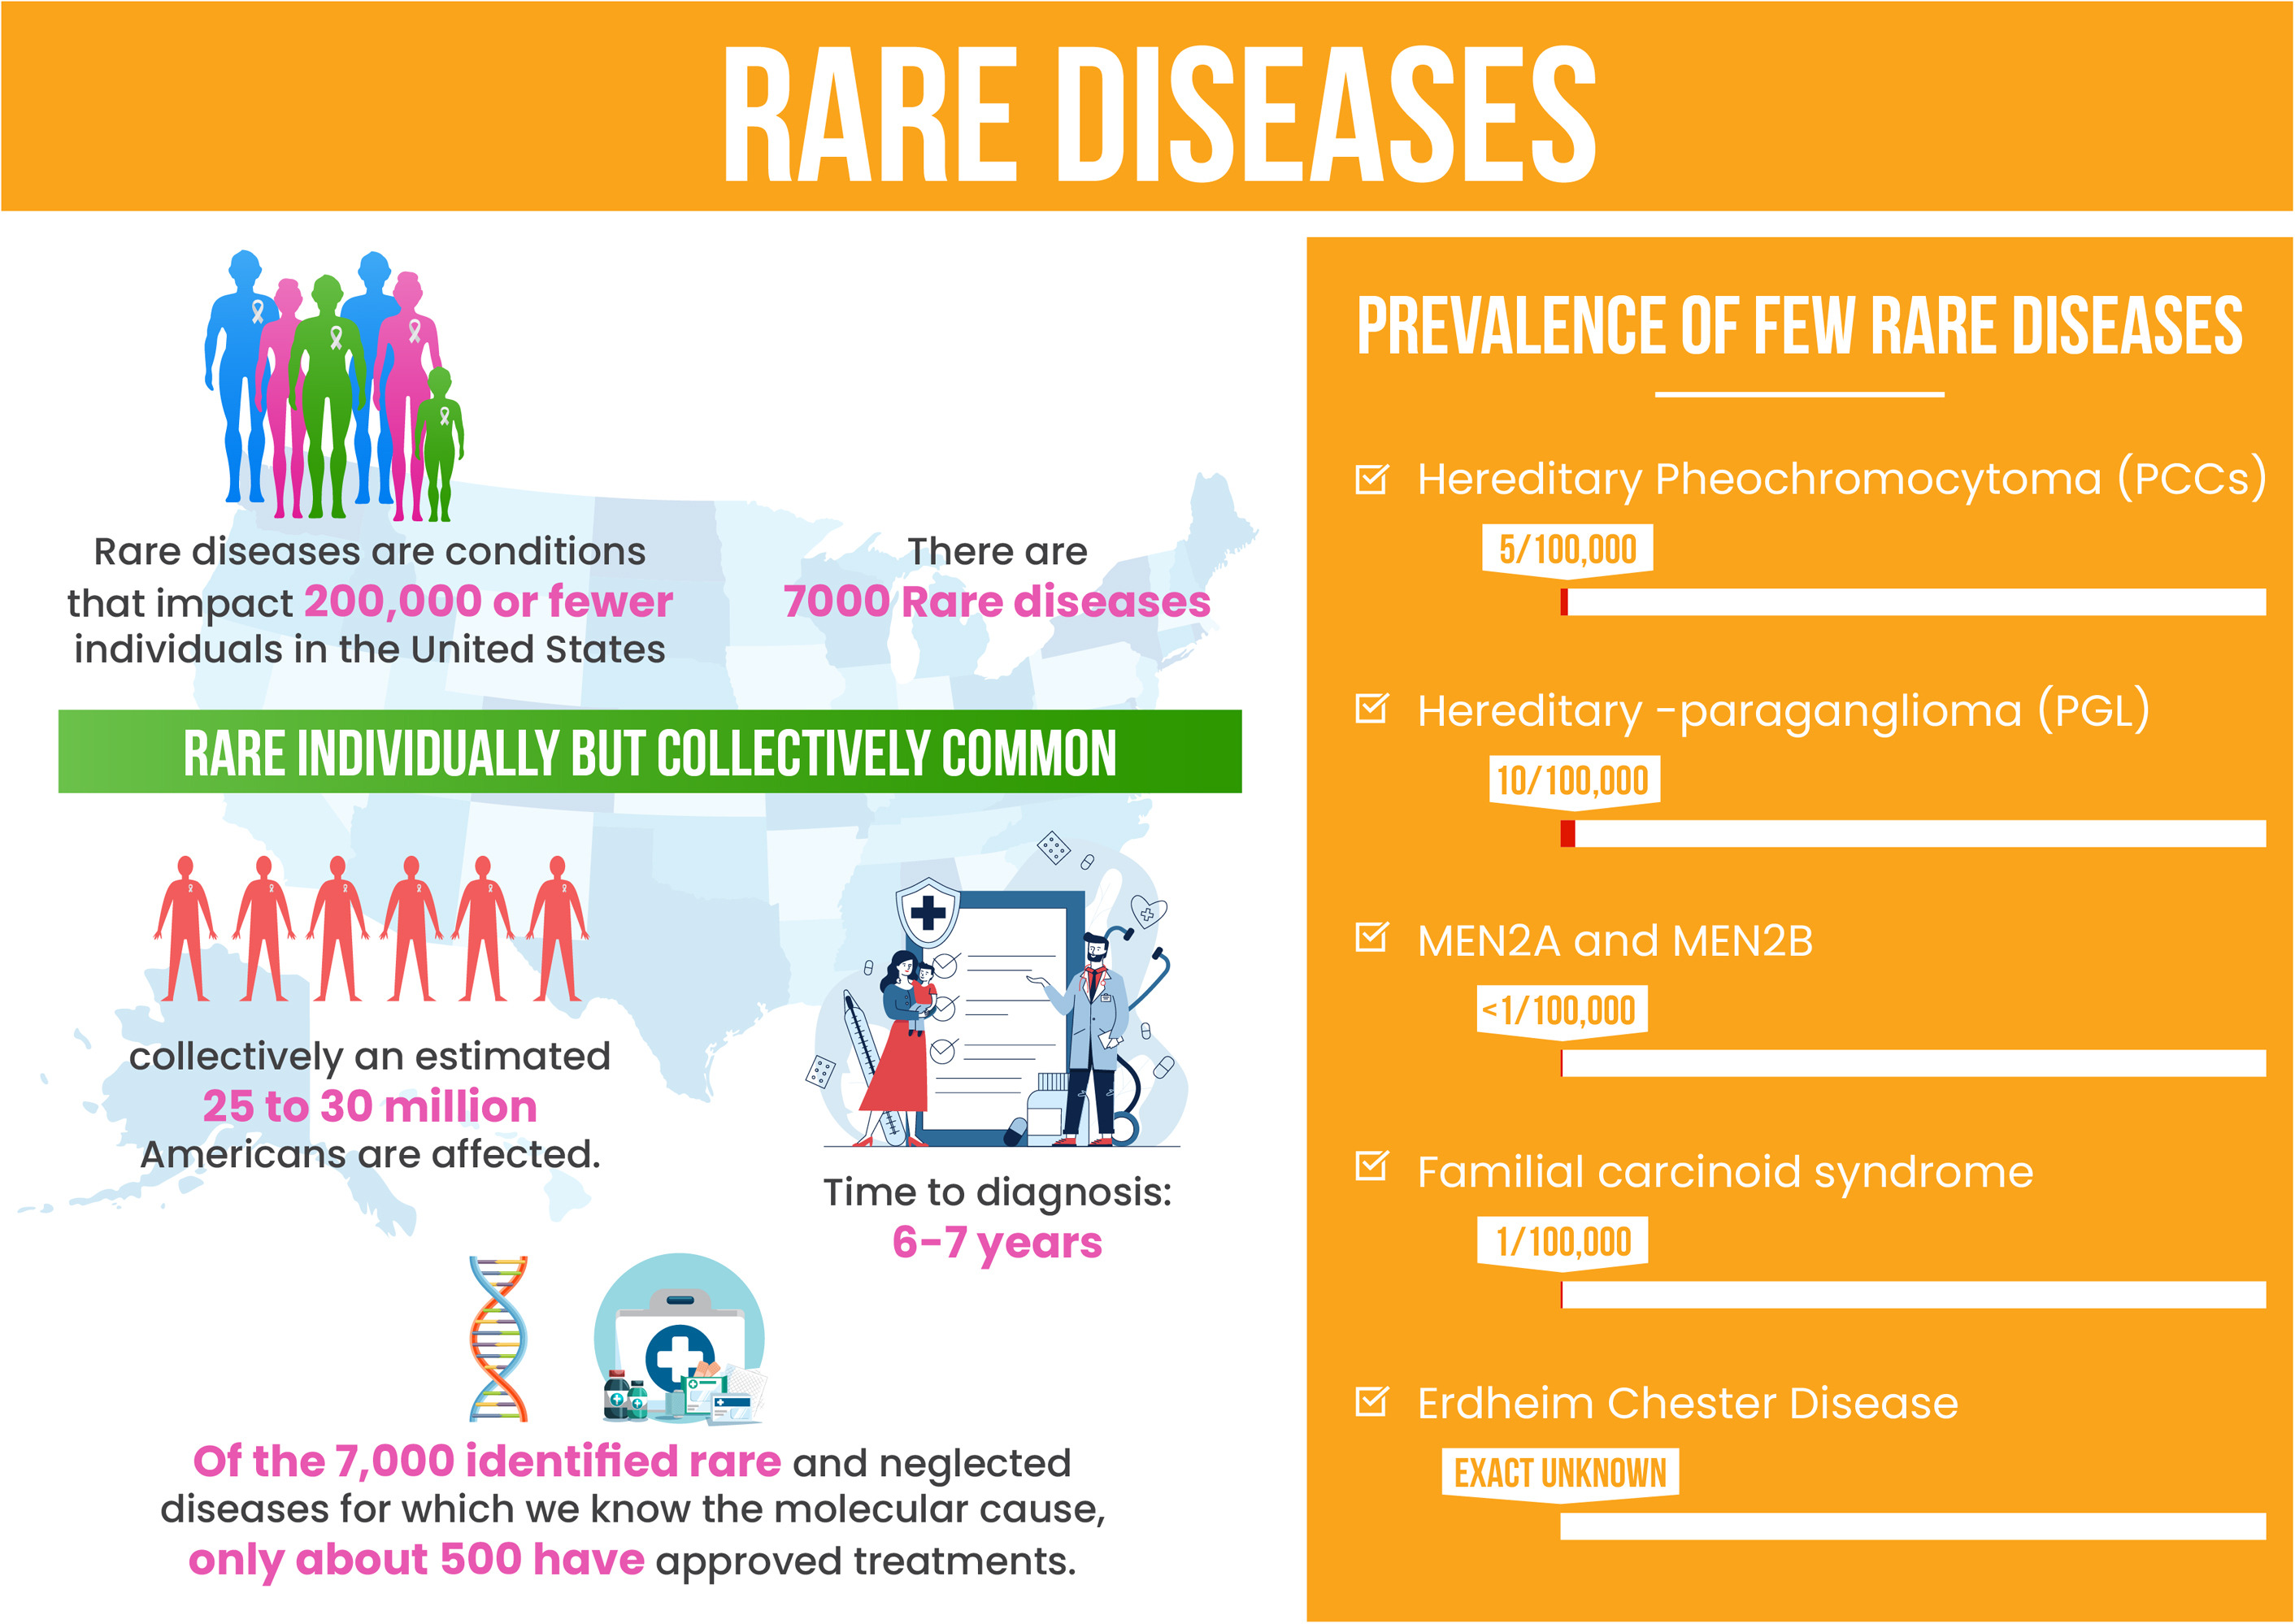 Statistics related to the epidemiology of RDs and the importance of early diagnosis.